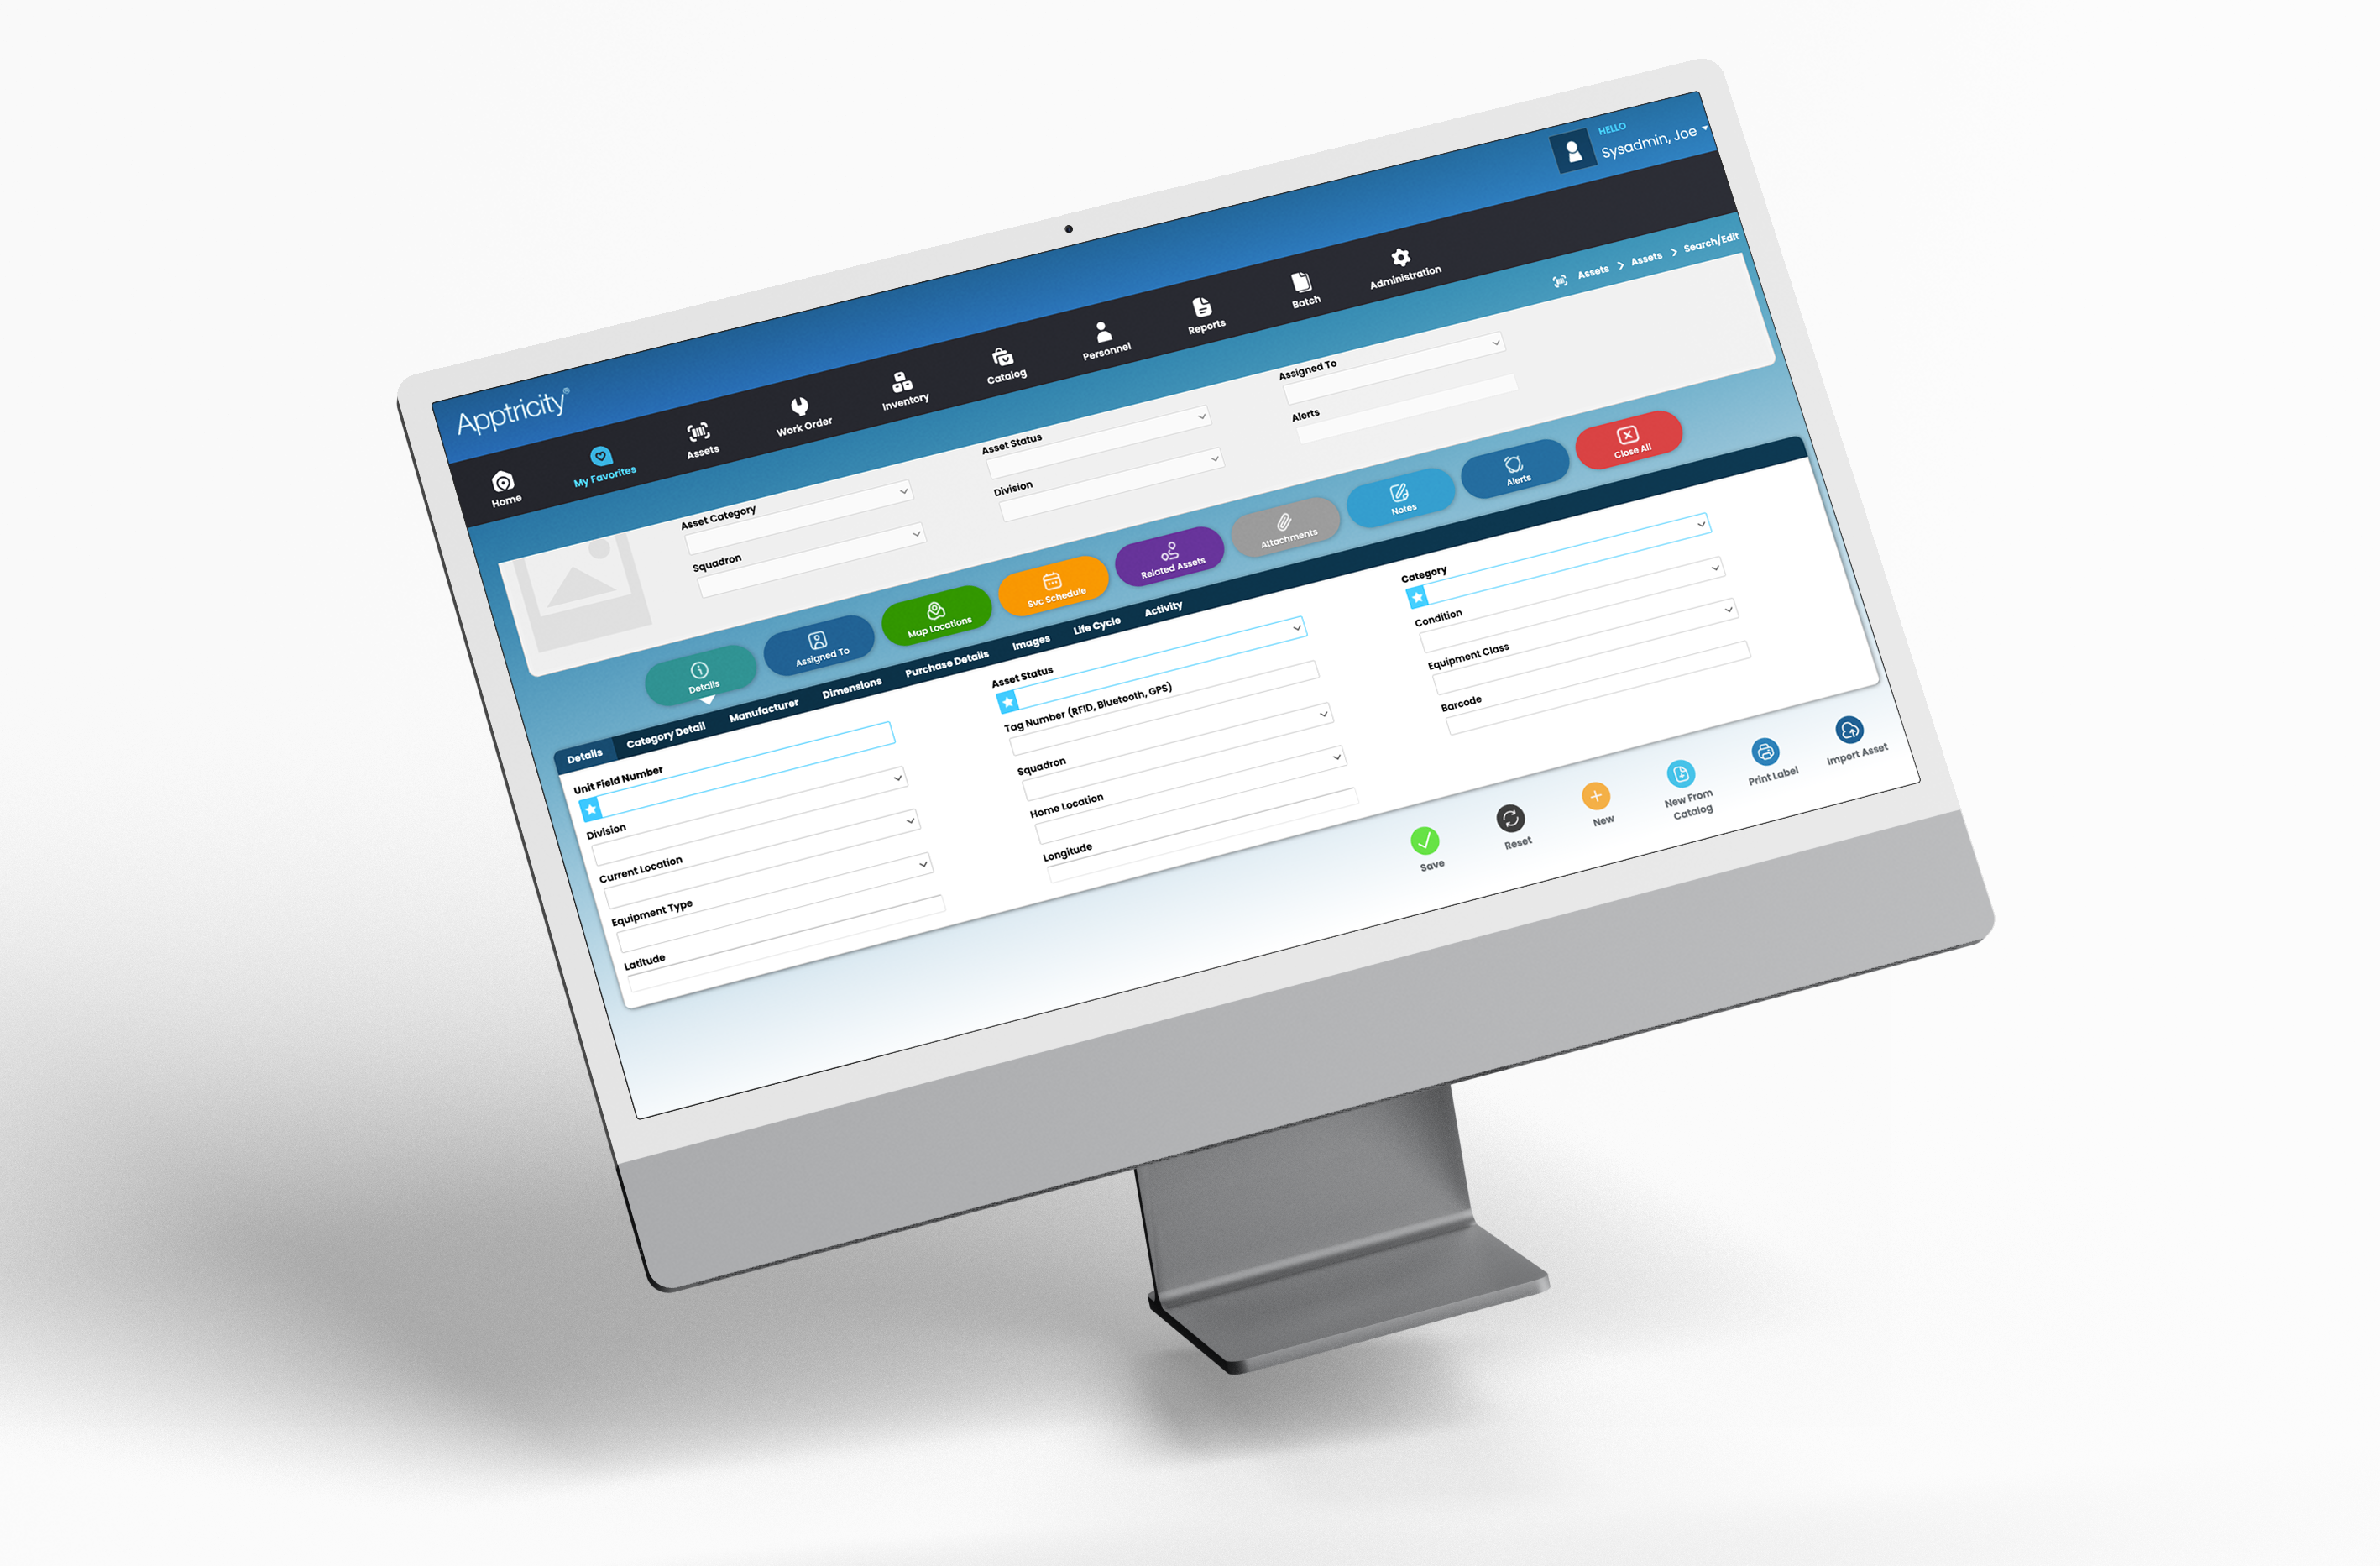 Apptricity Asset and Inventory Management Software with quick search functionality and easy-to-use action bars